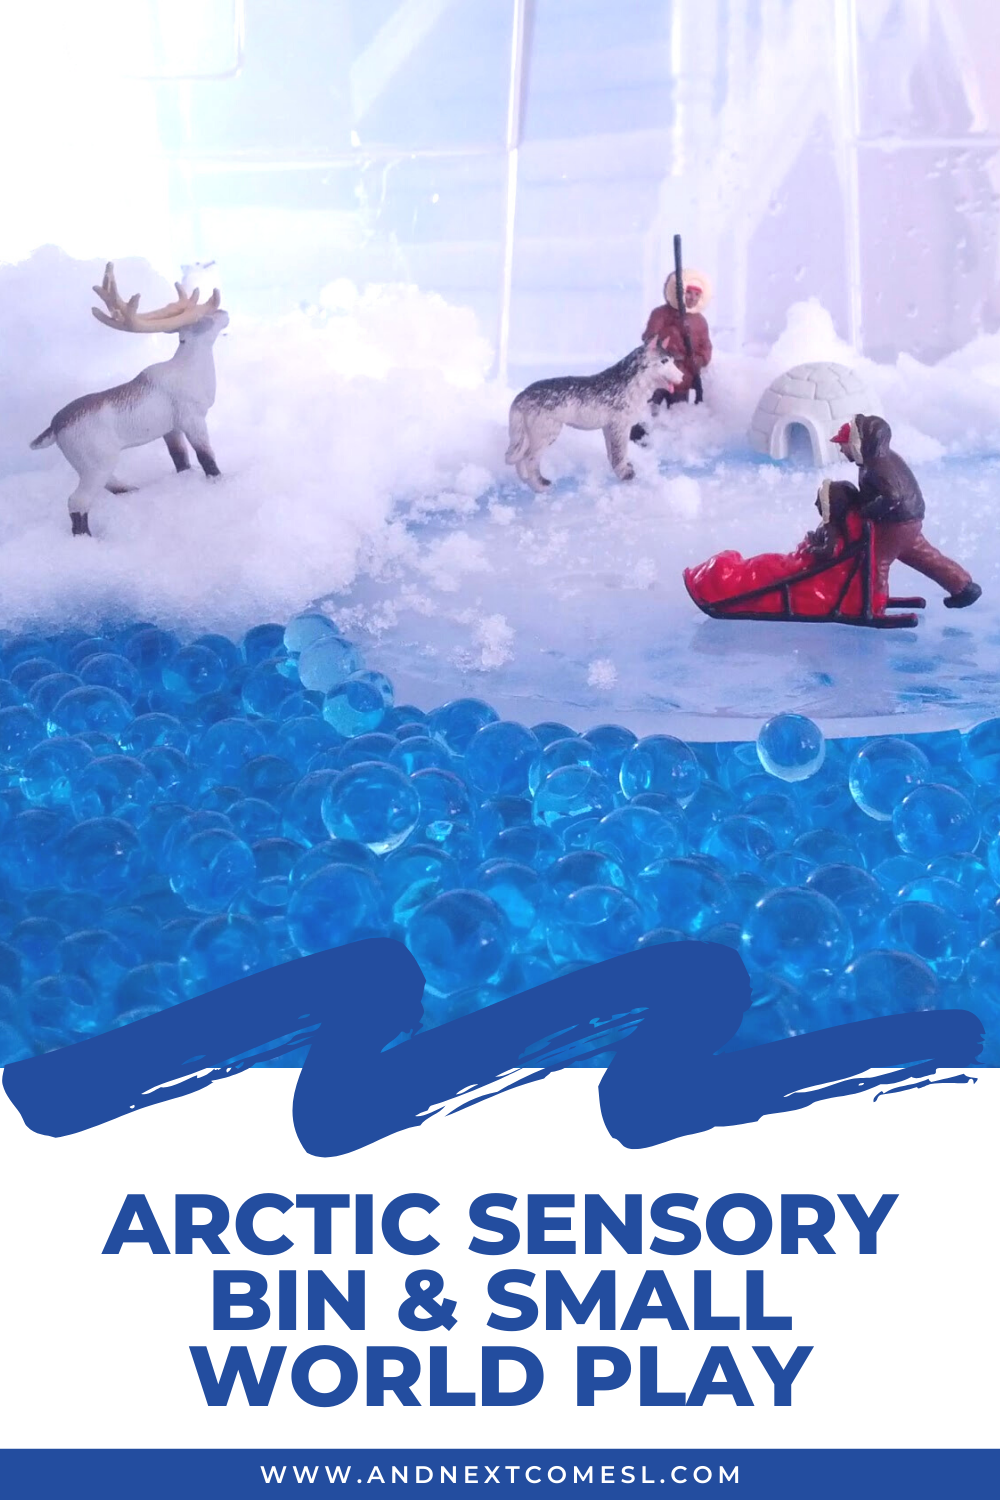 Arctic sensory bin and arctic animals small world - with water beads, snow, and ice